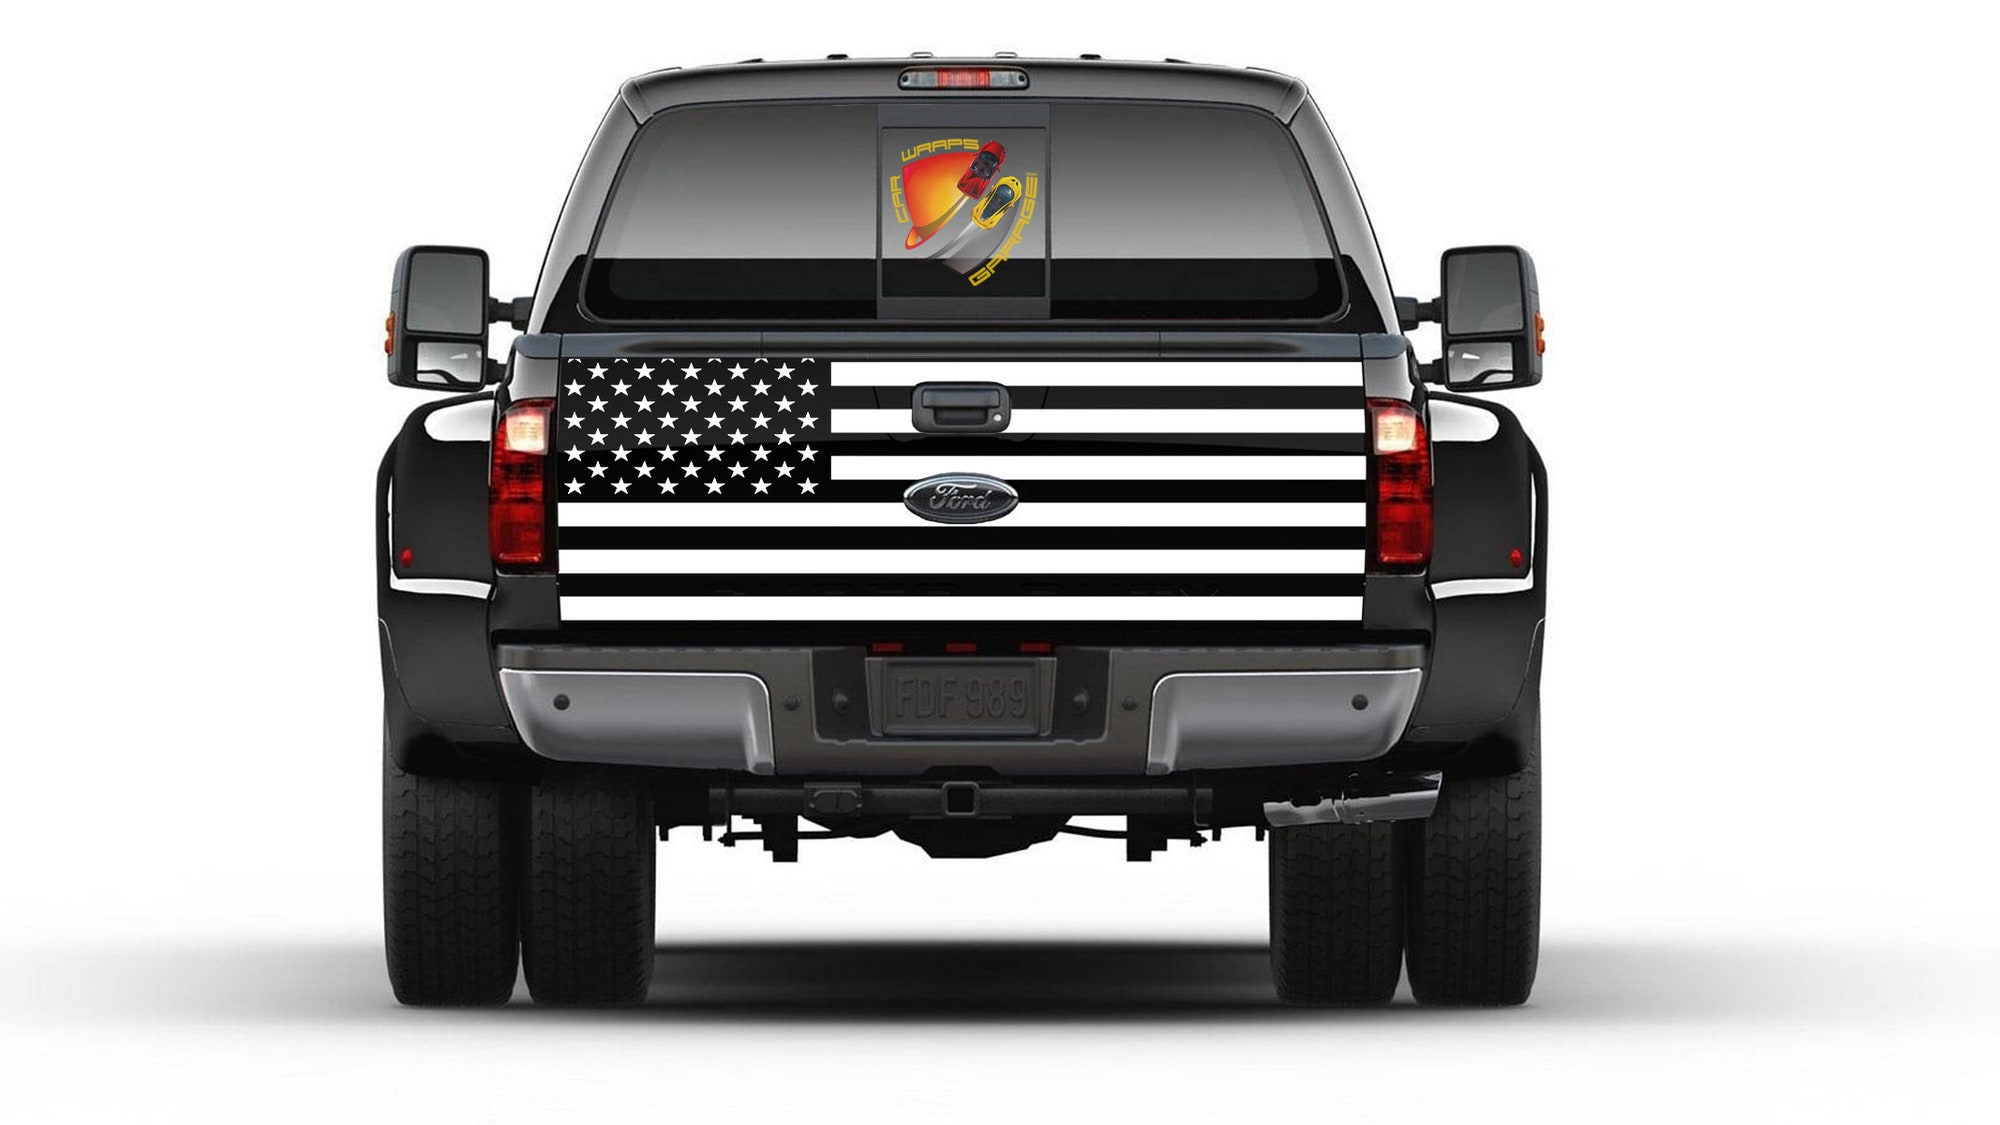 American Flag Black & White Tailgate Truck Bed Decal